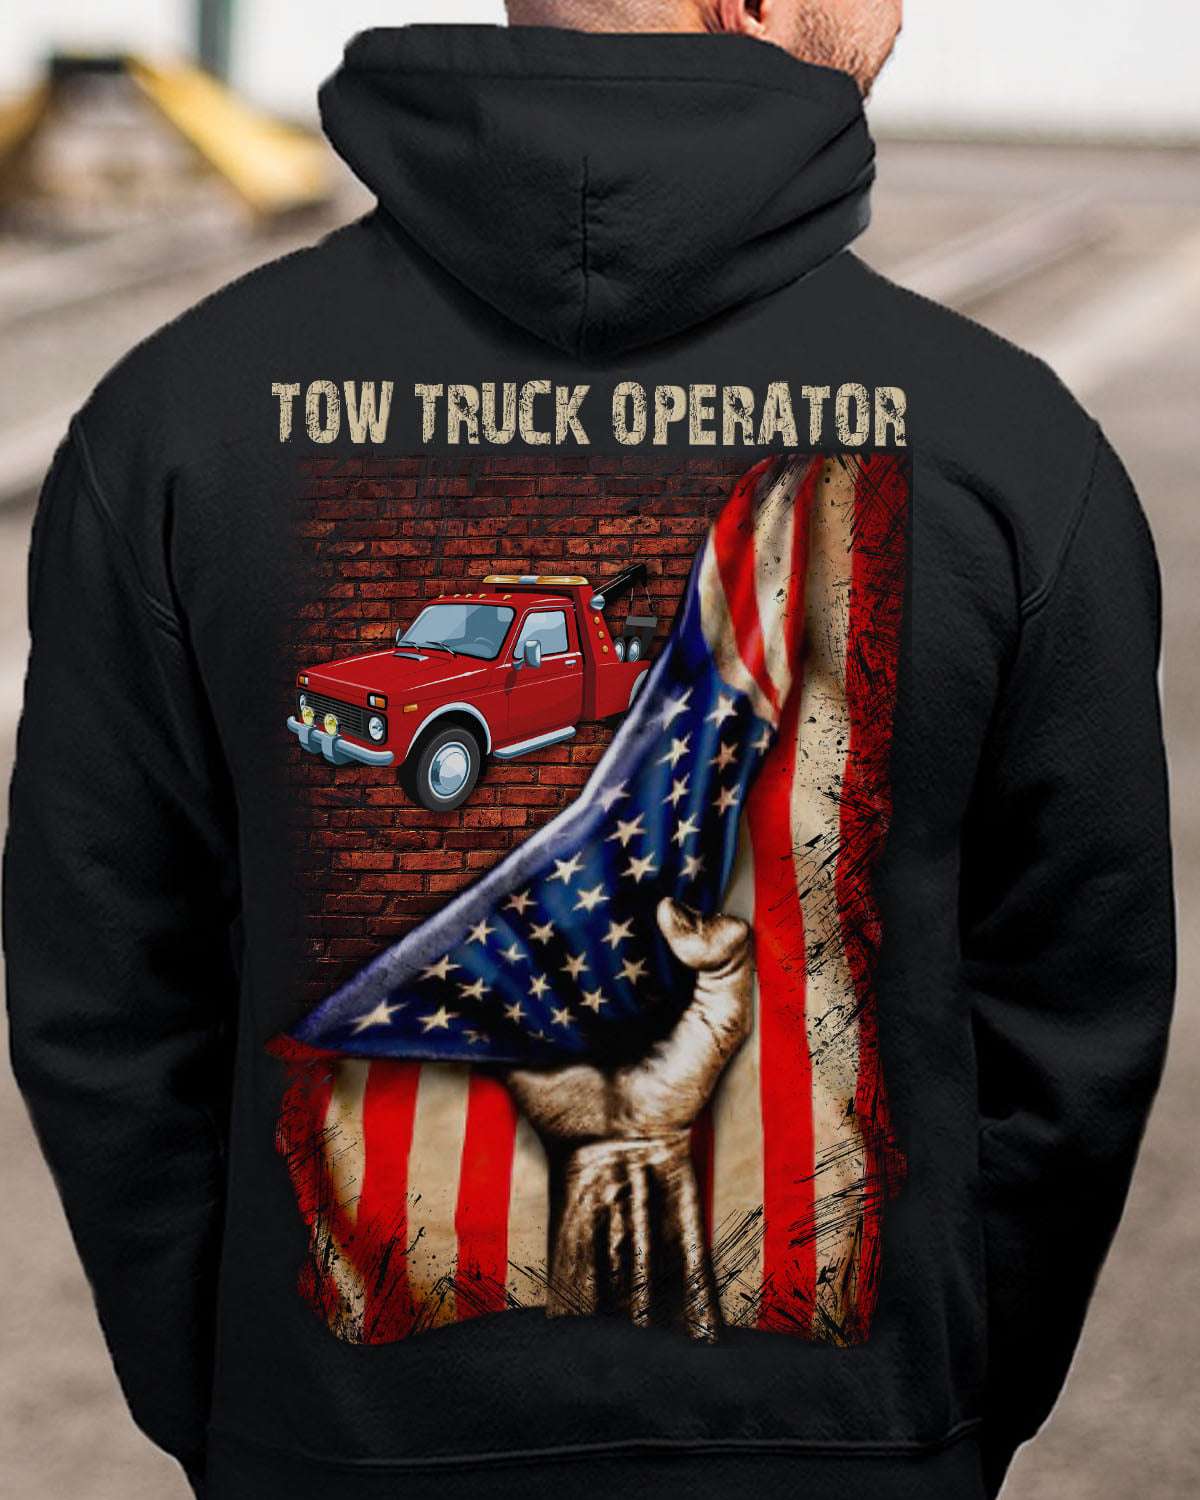 America Flag Tow Truck - Tow truck operator